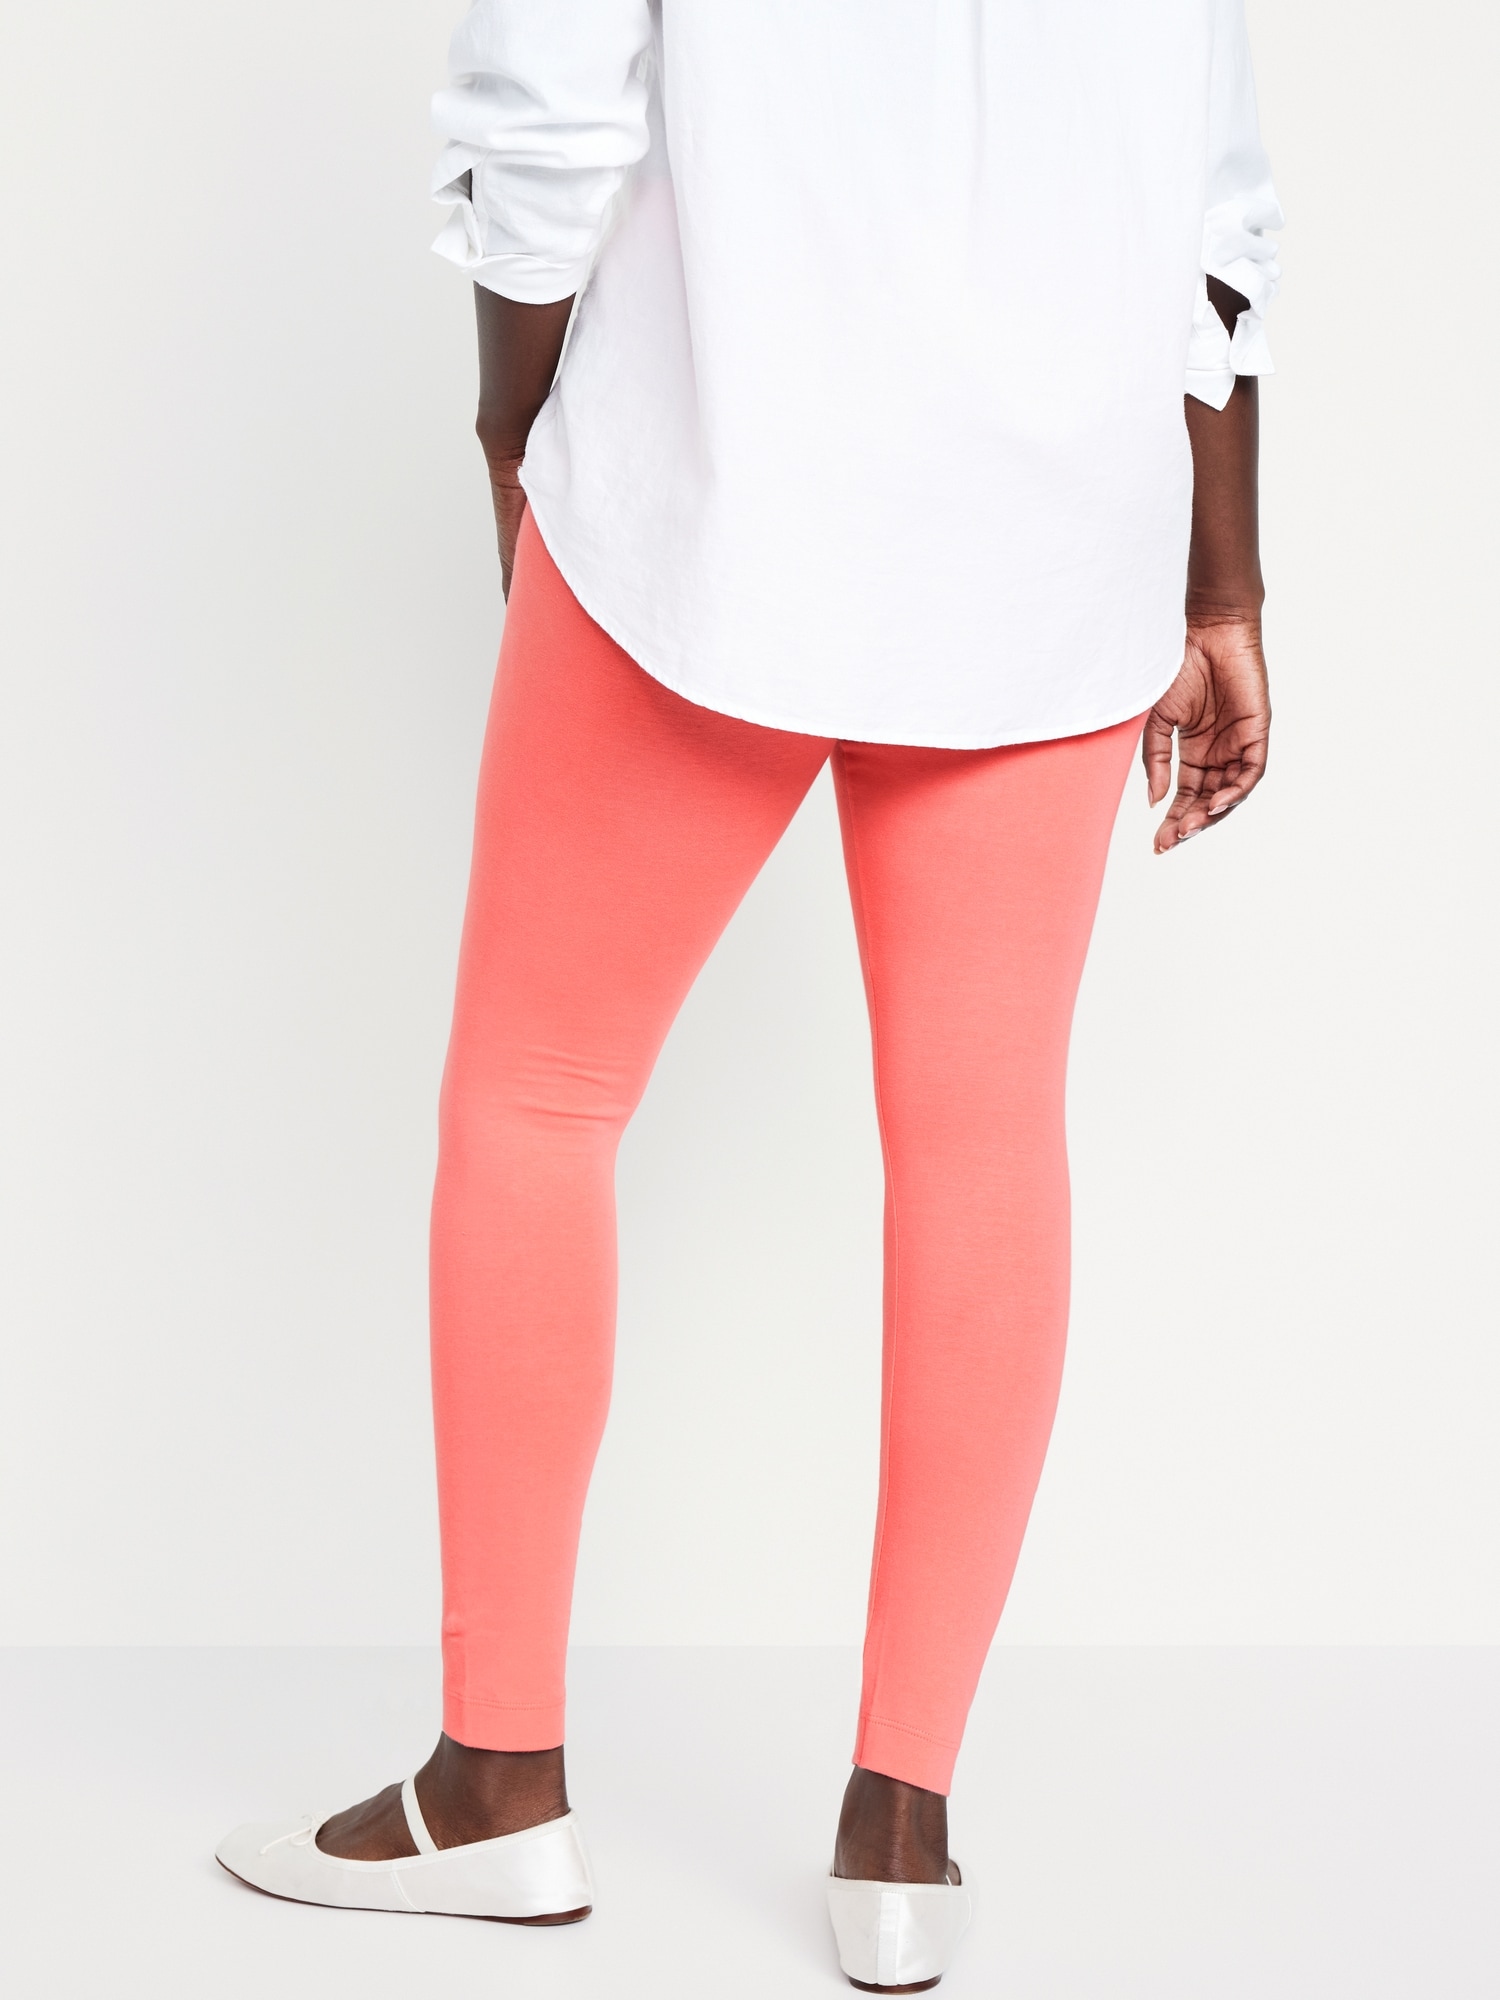 Jersey athletic leggings with cuffs